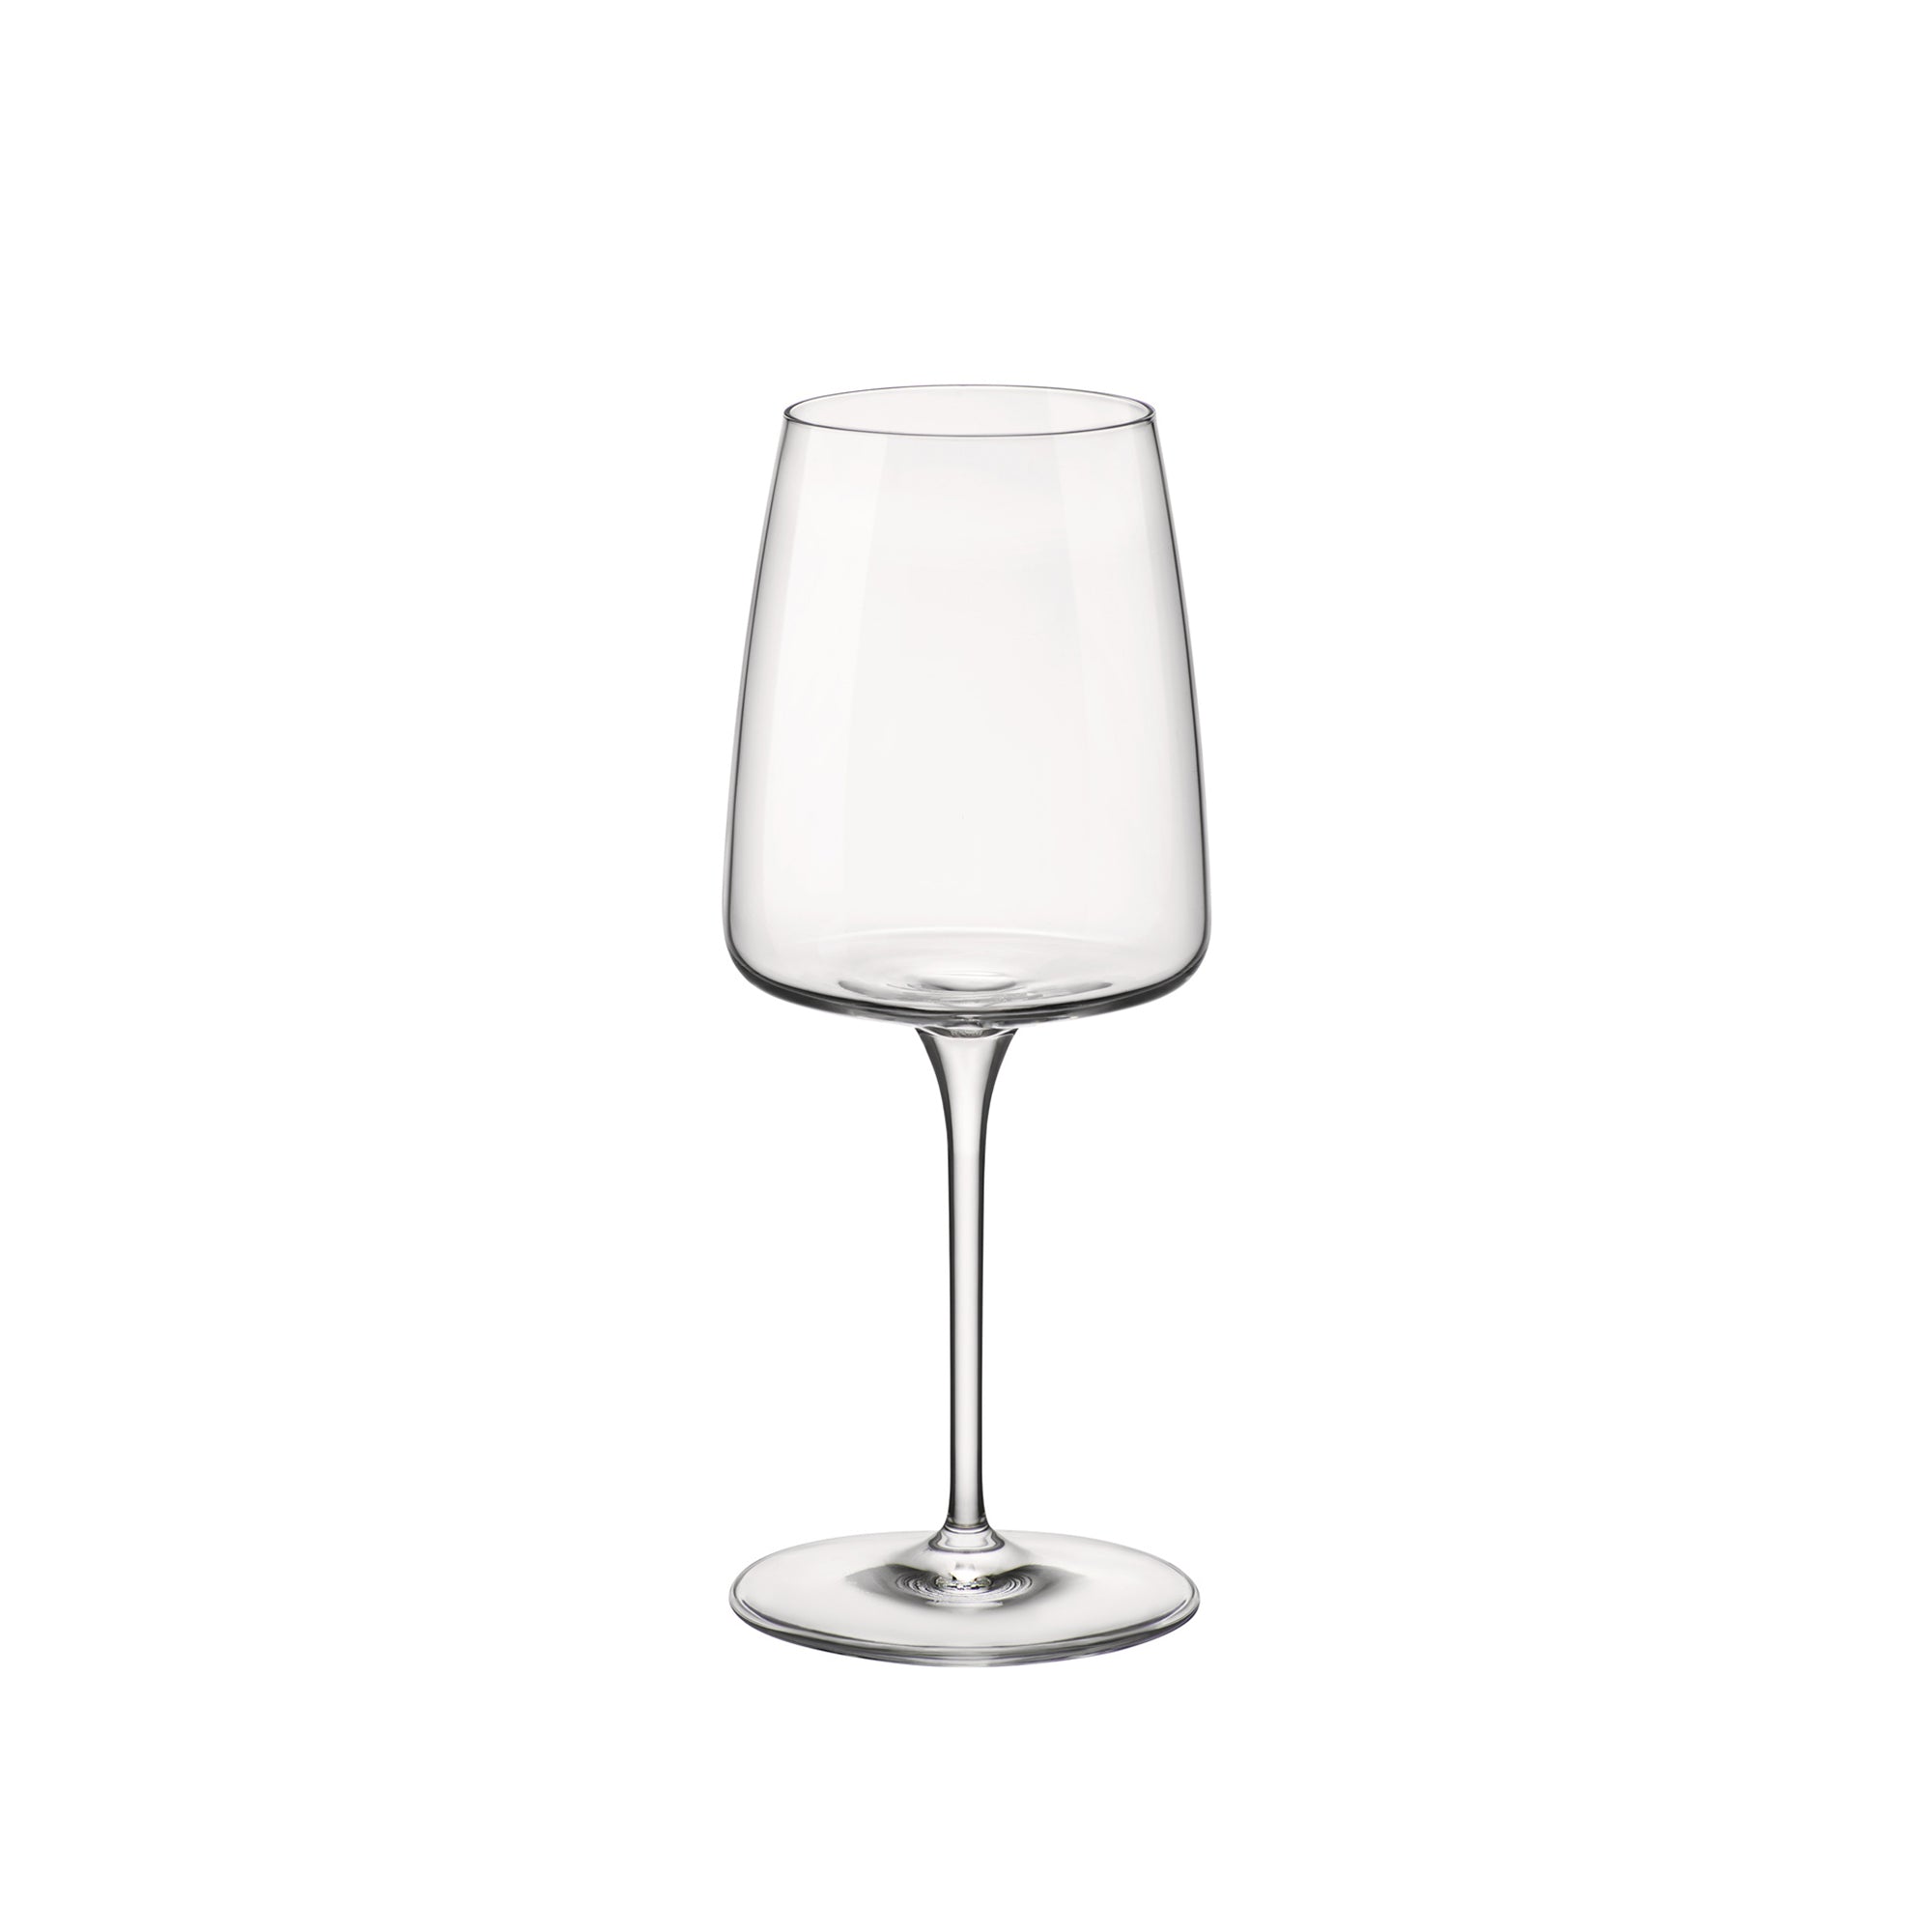 Bormioli Rocco Crinkle Glasses (Set of 6), 3 Sizes, Made in Italy, Tempered  Glass on Food52